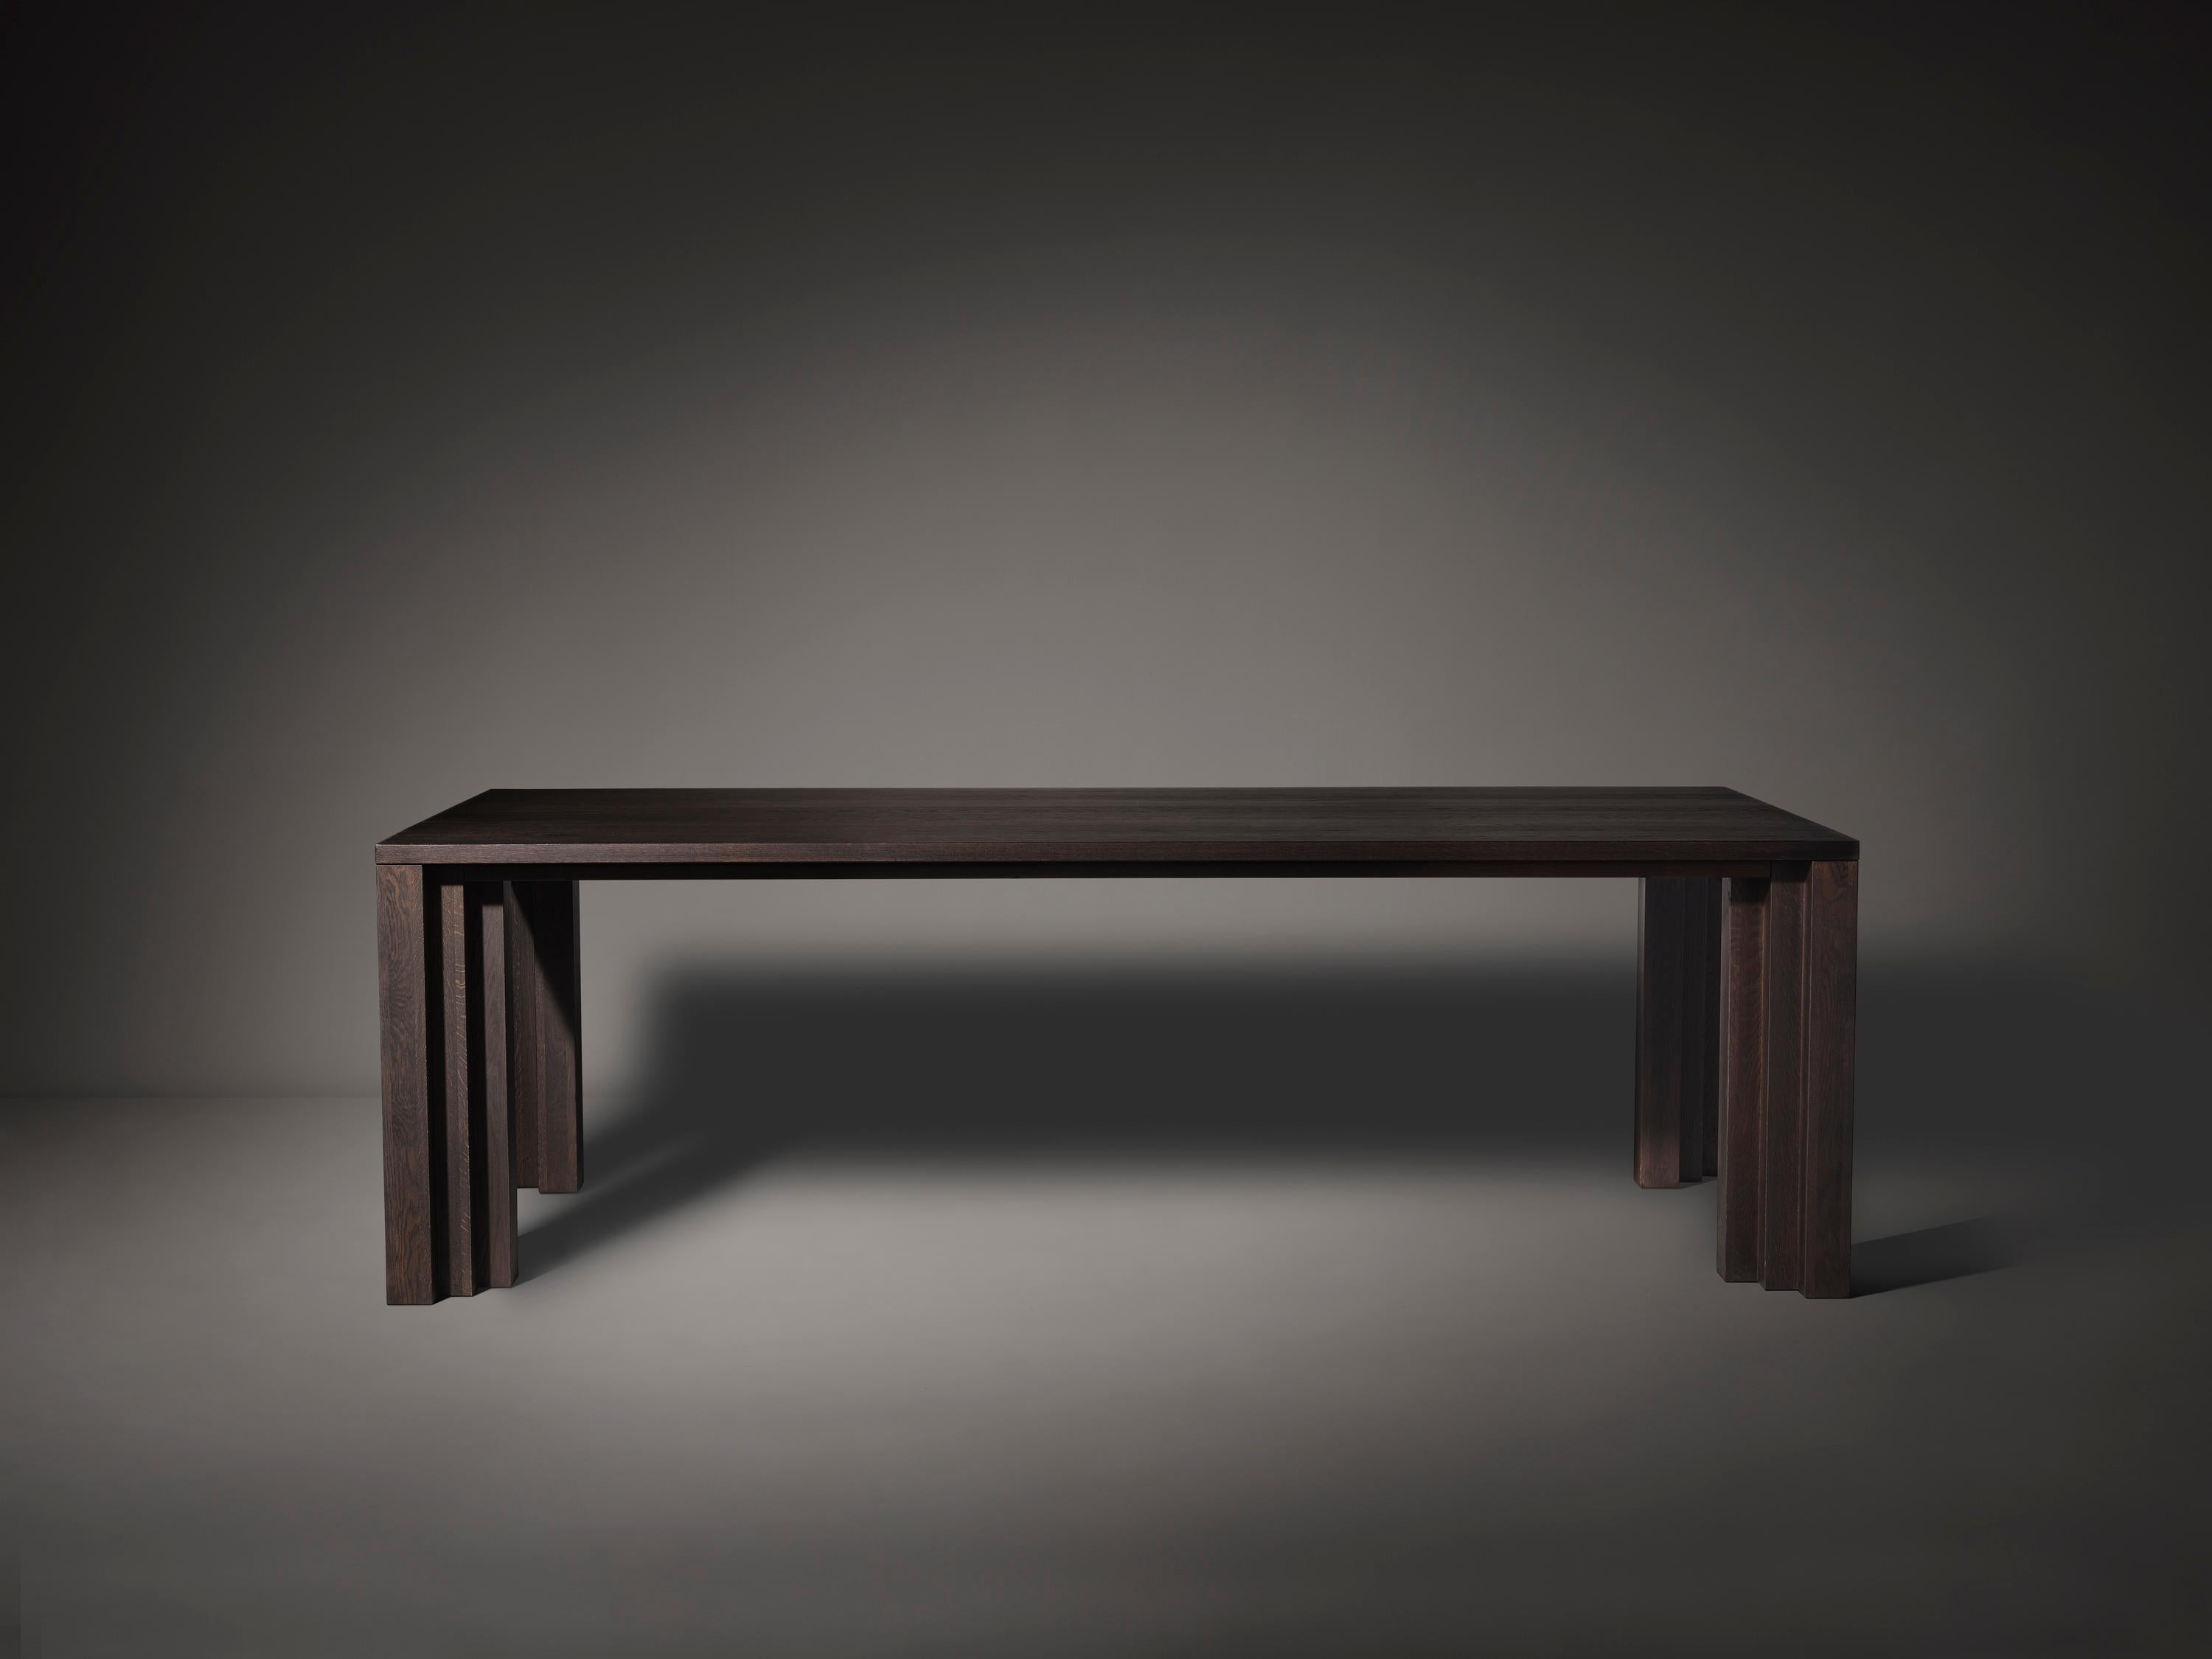 The Cadence Table, features a flow of volumes and shade lines in a sequence that is rhythmic and exciting. Its repetitive forms deepen the meaning of the home's altar that is the table. The table is made from solid hardwood and designed by Aad